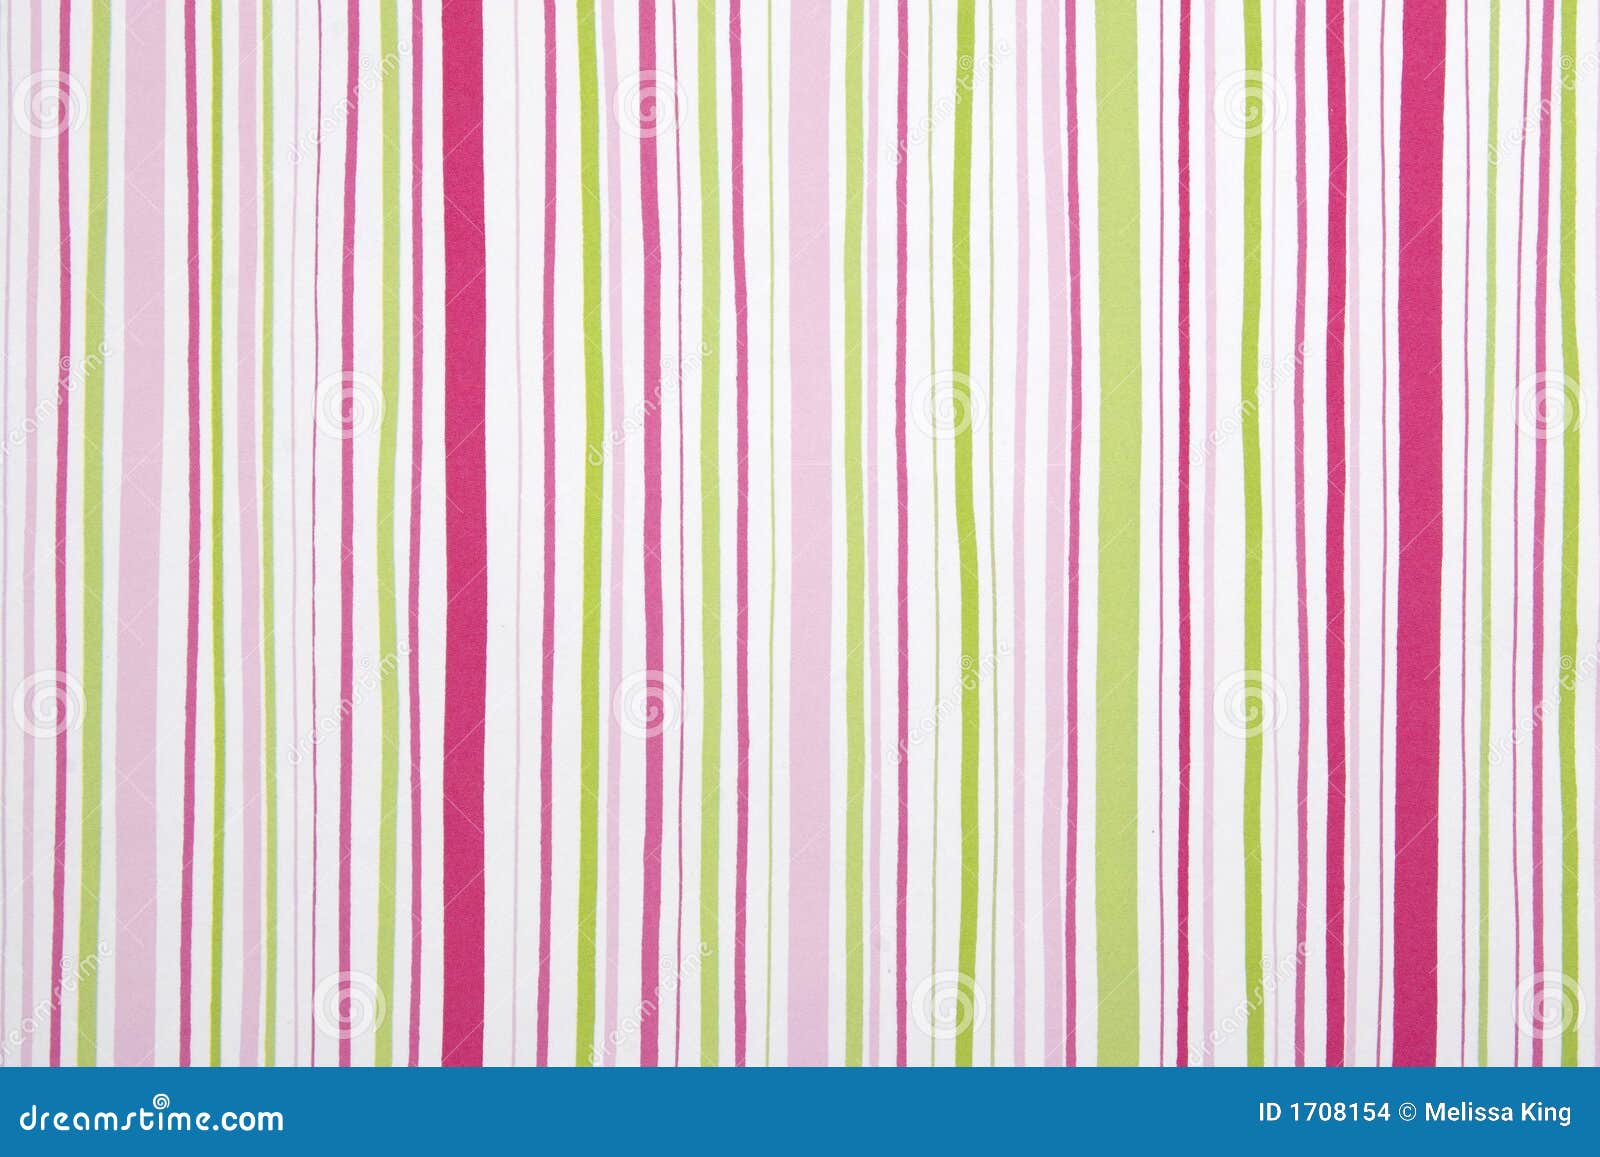 tumblr only backgrounds girly Images Background 1708154 Abstract Stock Lines   Image: